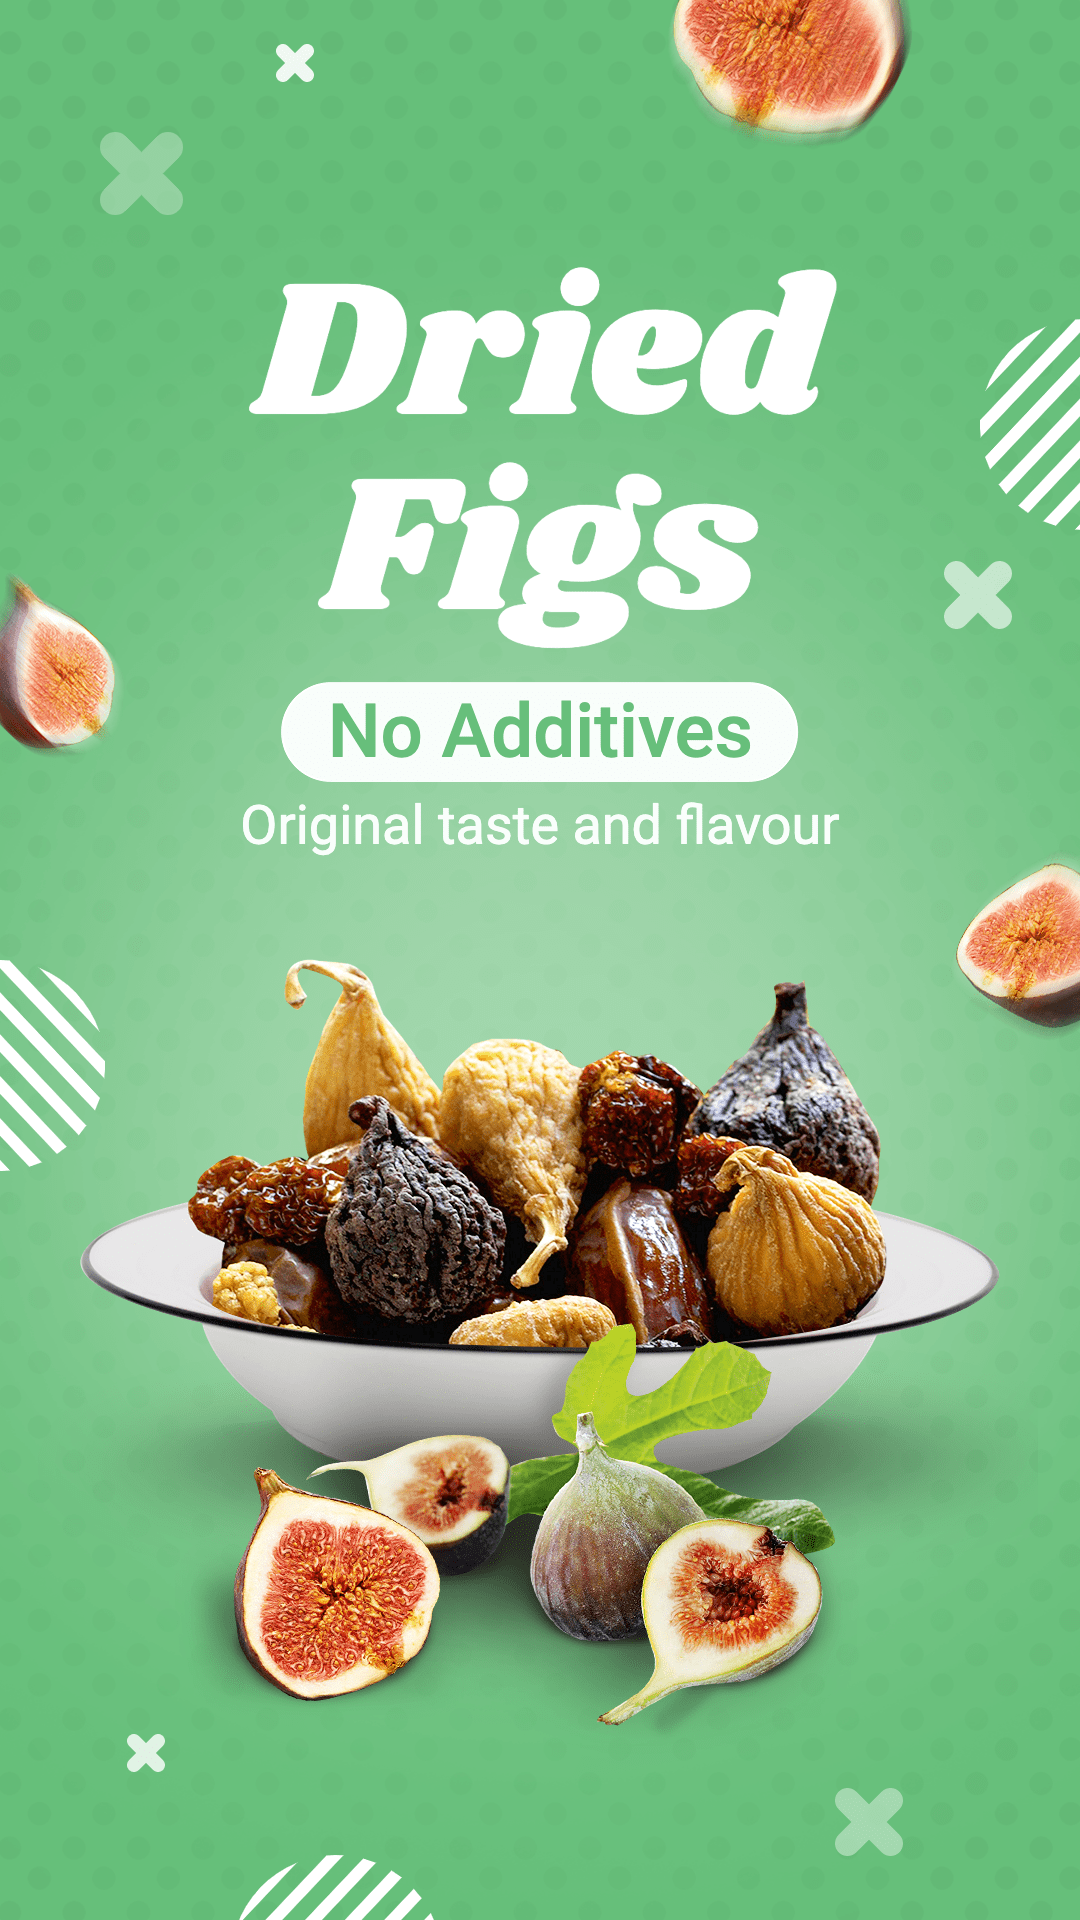 Dried Figs Consumer Packaged Food Snacks Ecommerce Story